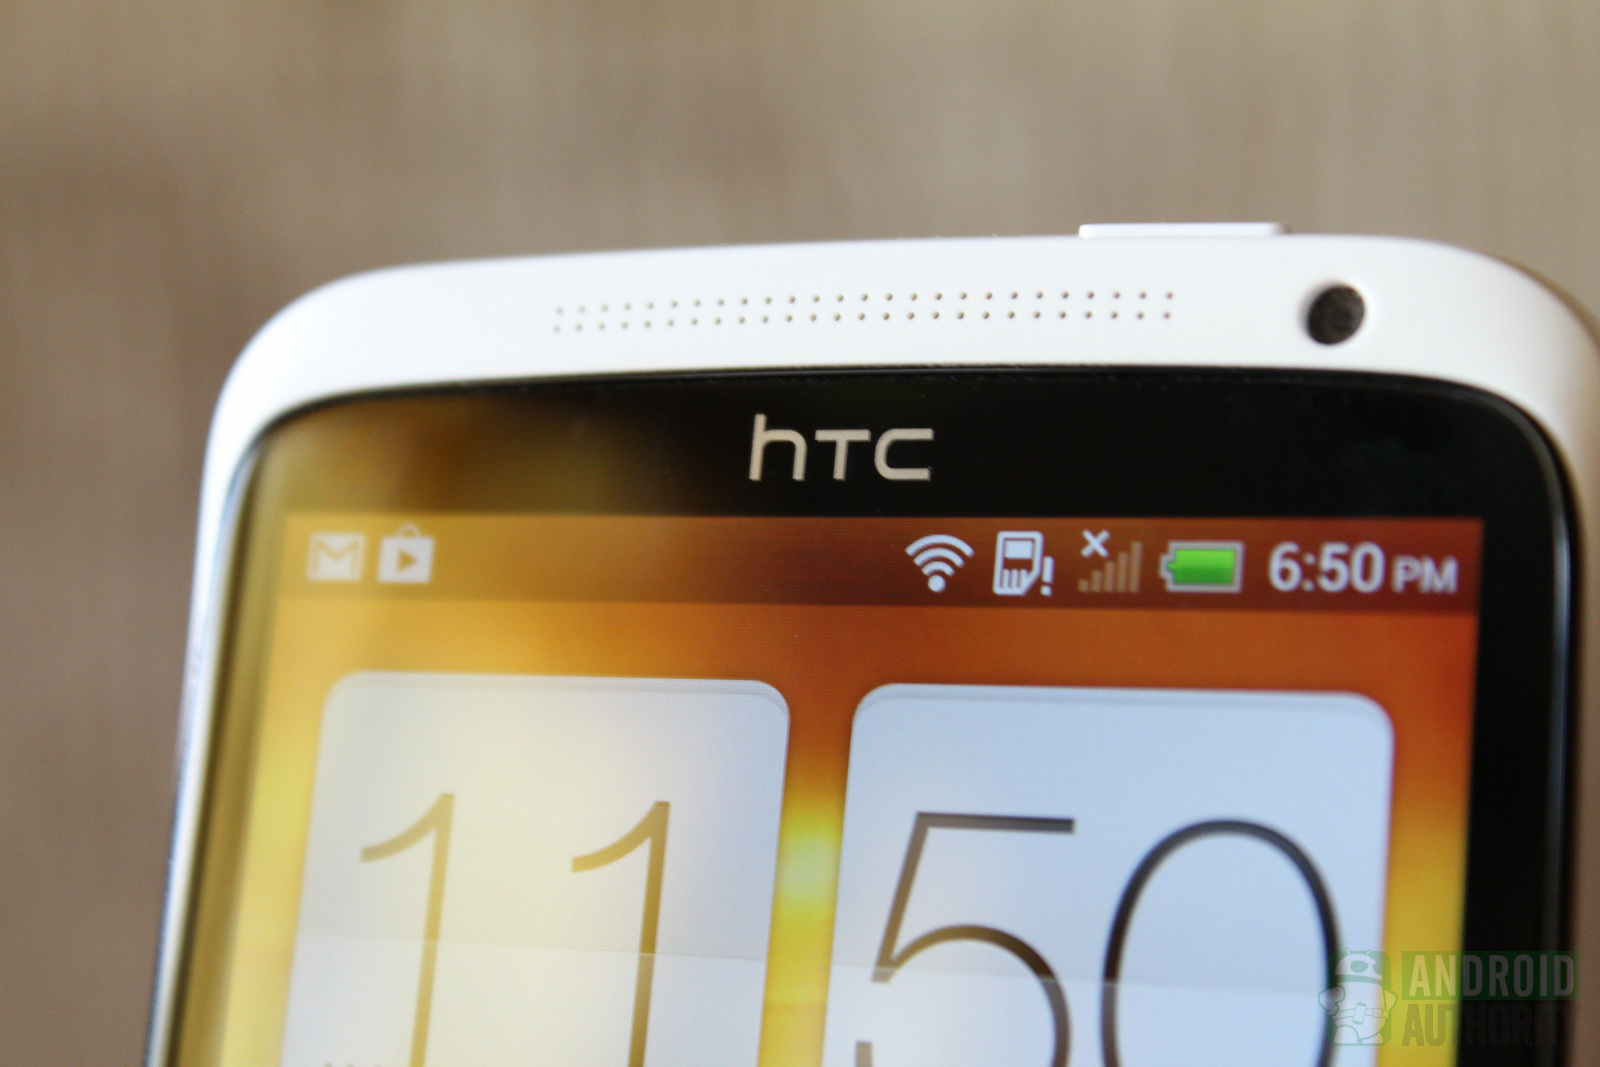 Screen of an HTC phone showing the HTC logo